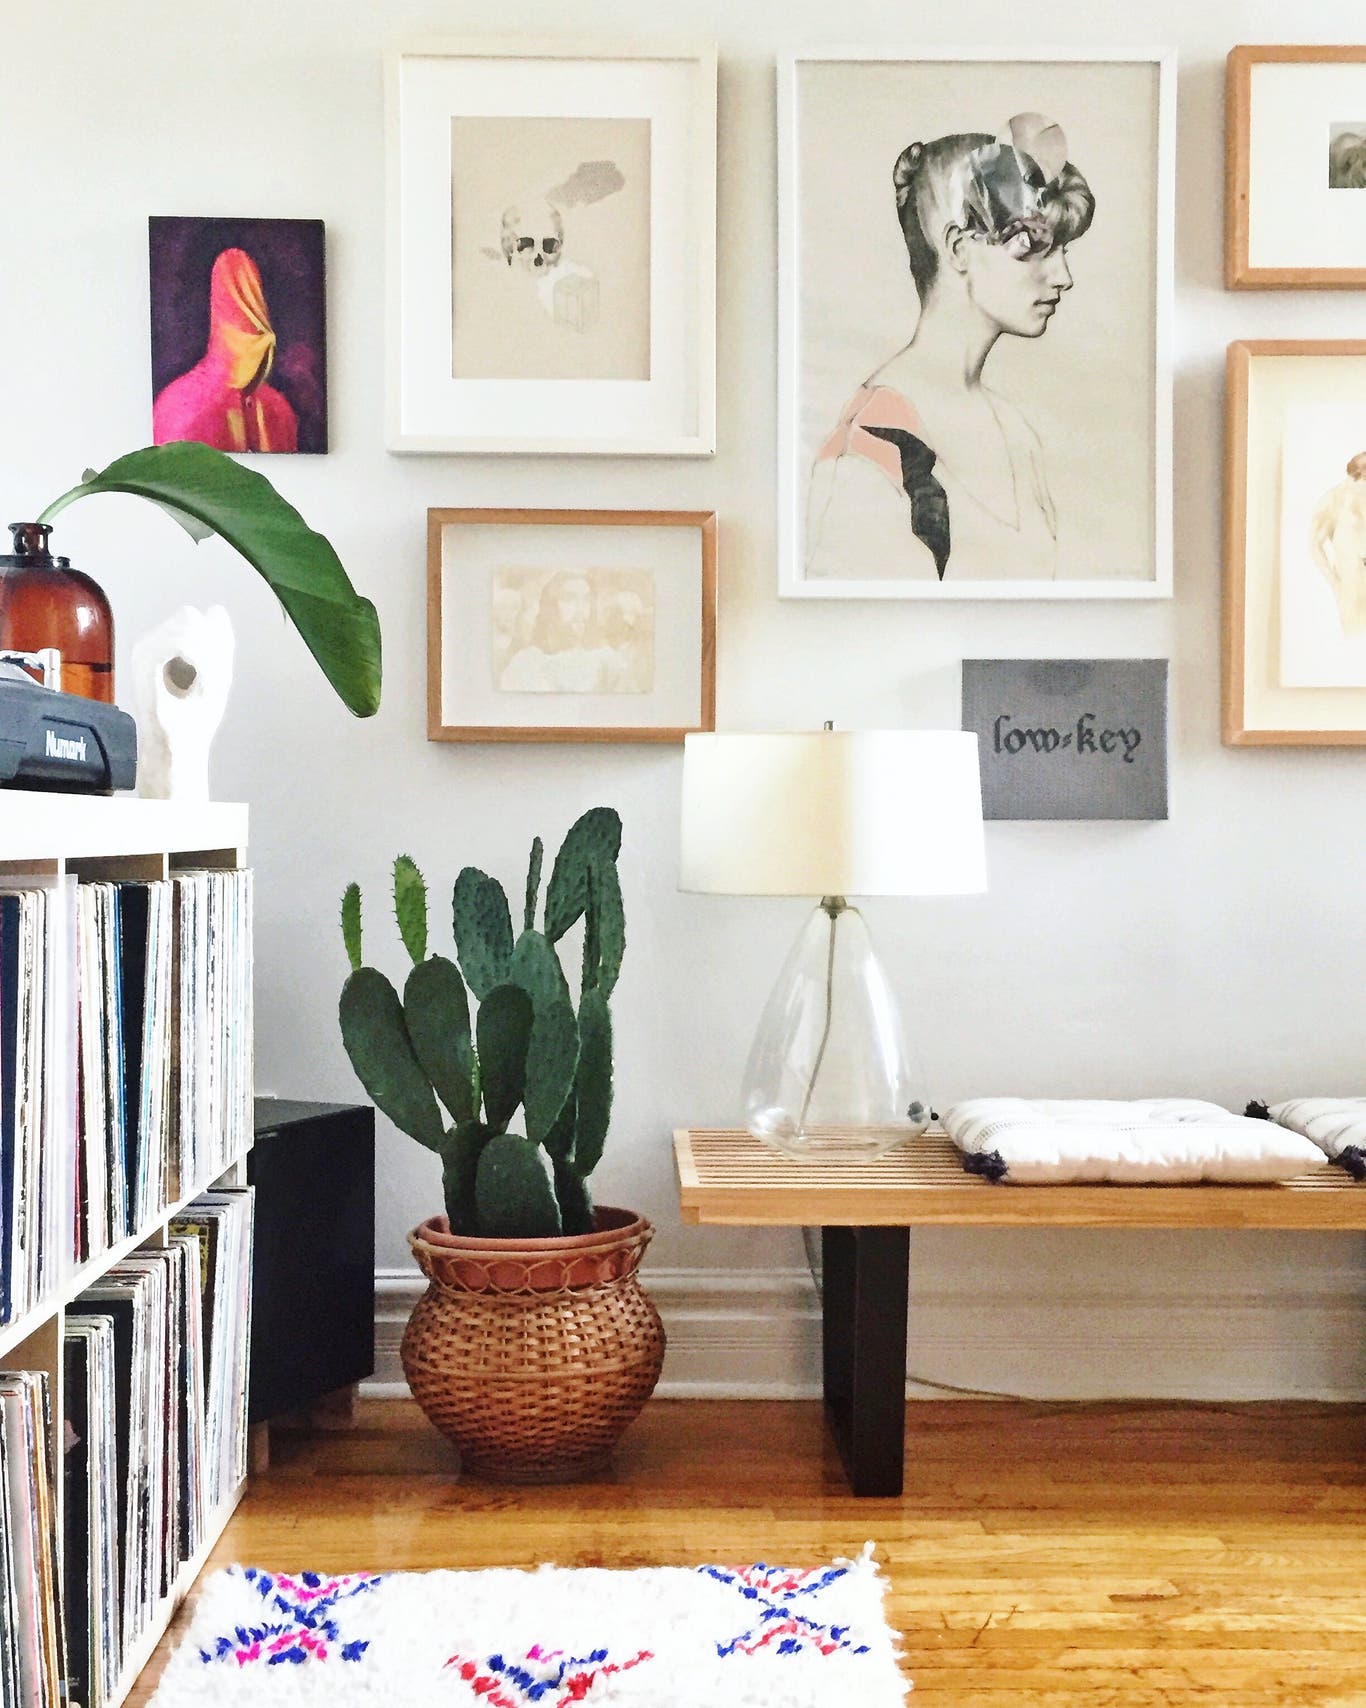 Elaine Gaito's Toronto Home Tour Is Filled With Local Art and Old Records